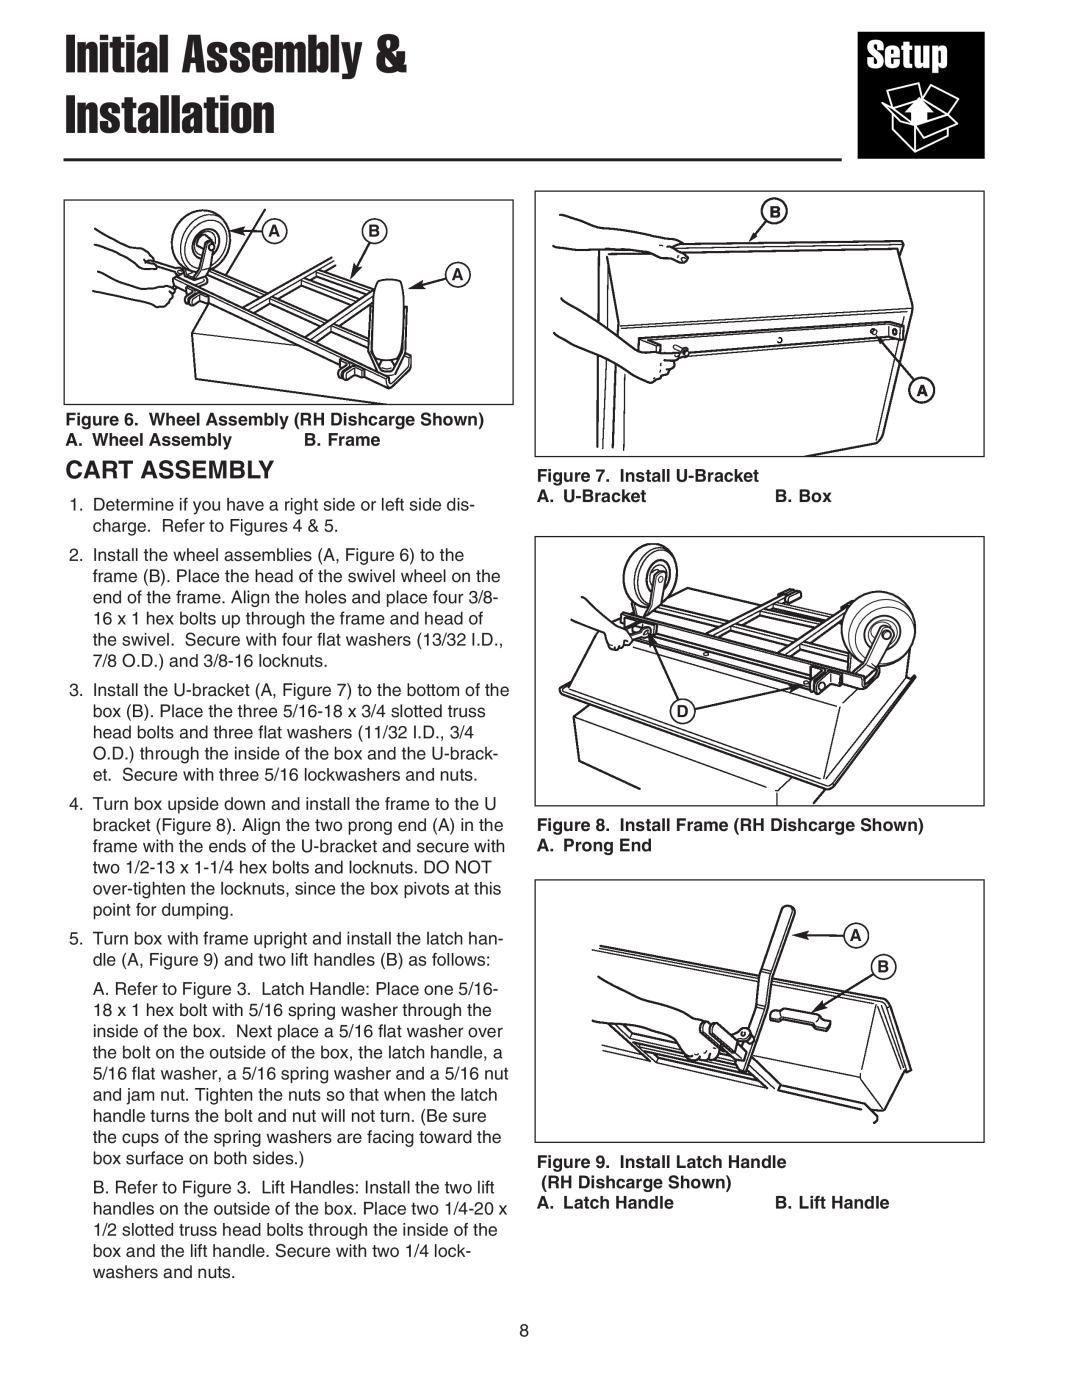 Snapper 1726564, 1694542 manual Cart Assembly, Initial Assembly & Installation 